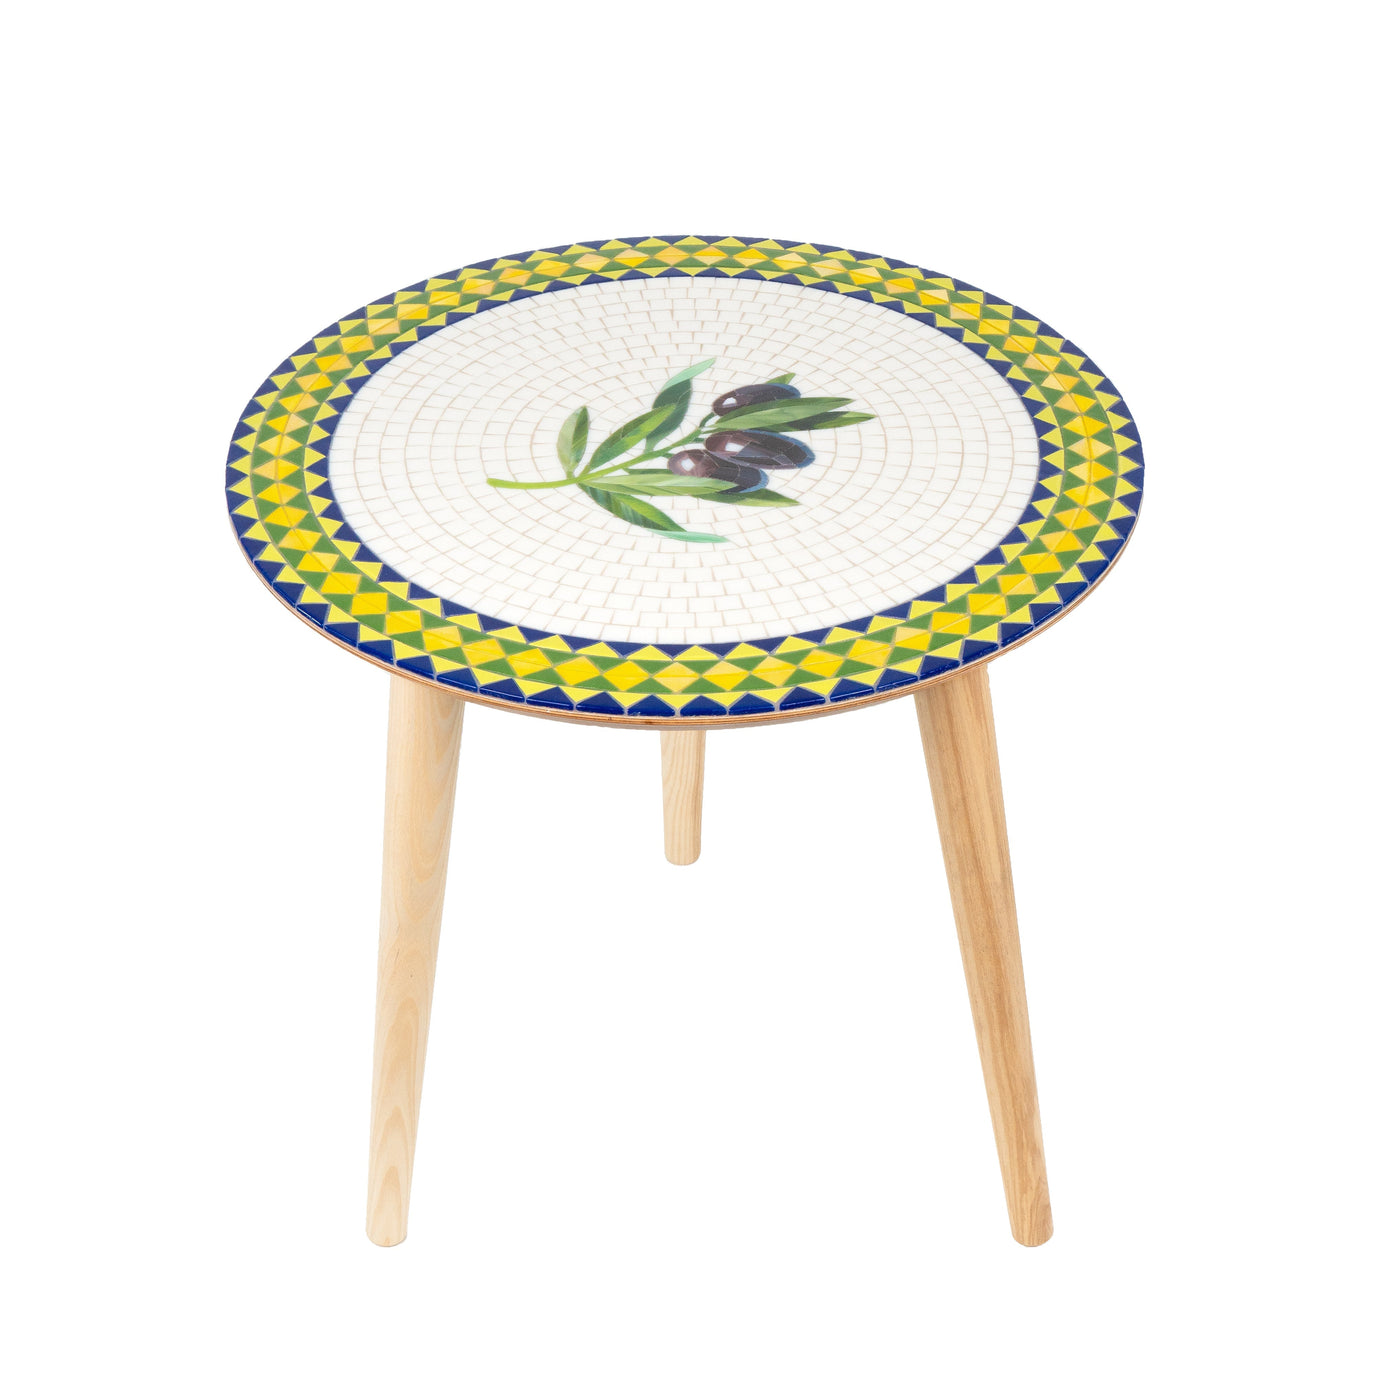 Olives pattern on stained glass mosaic round table